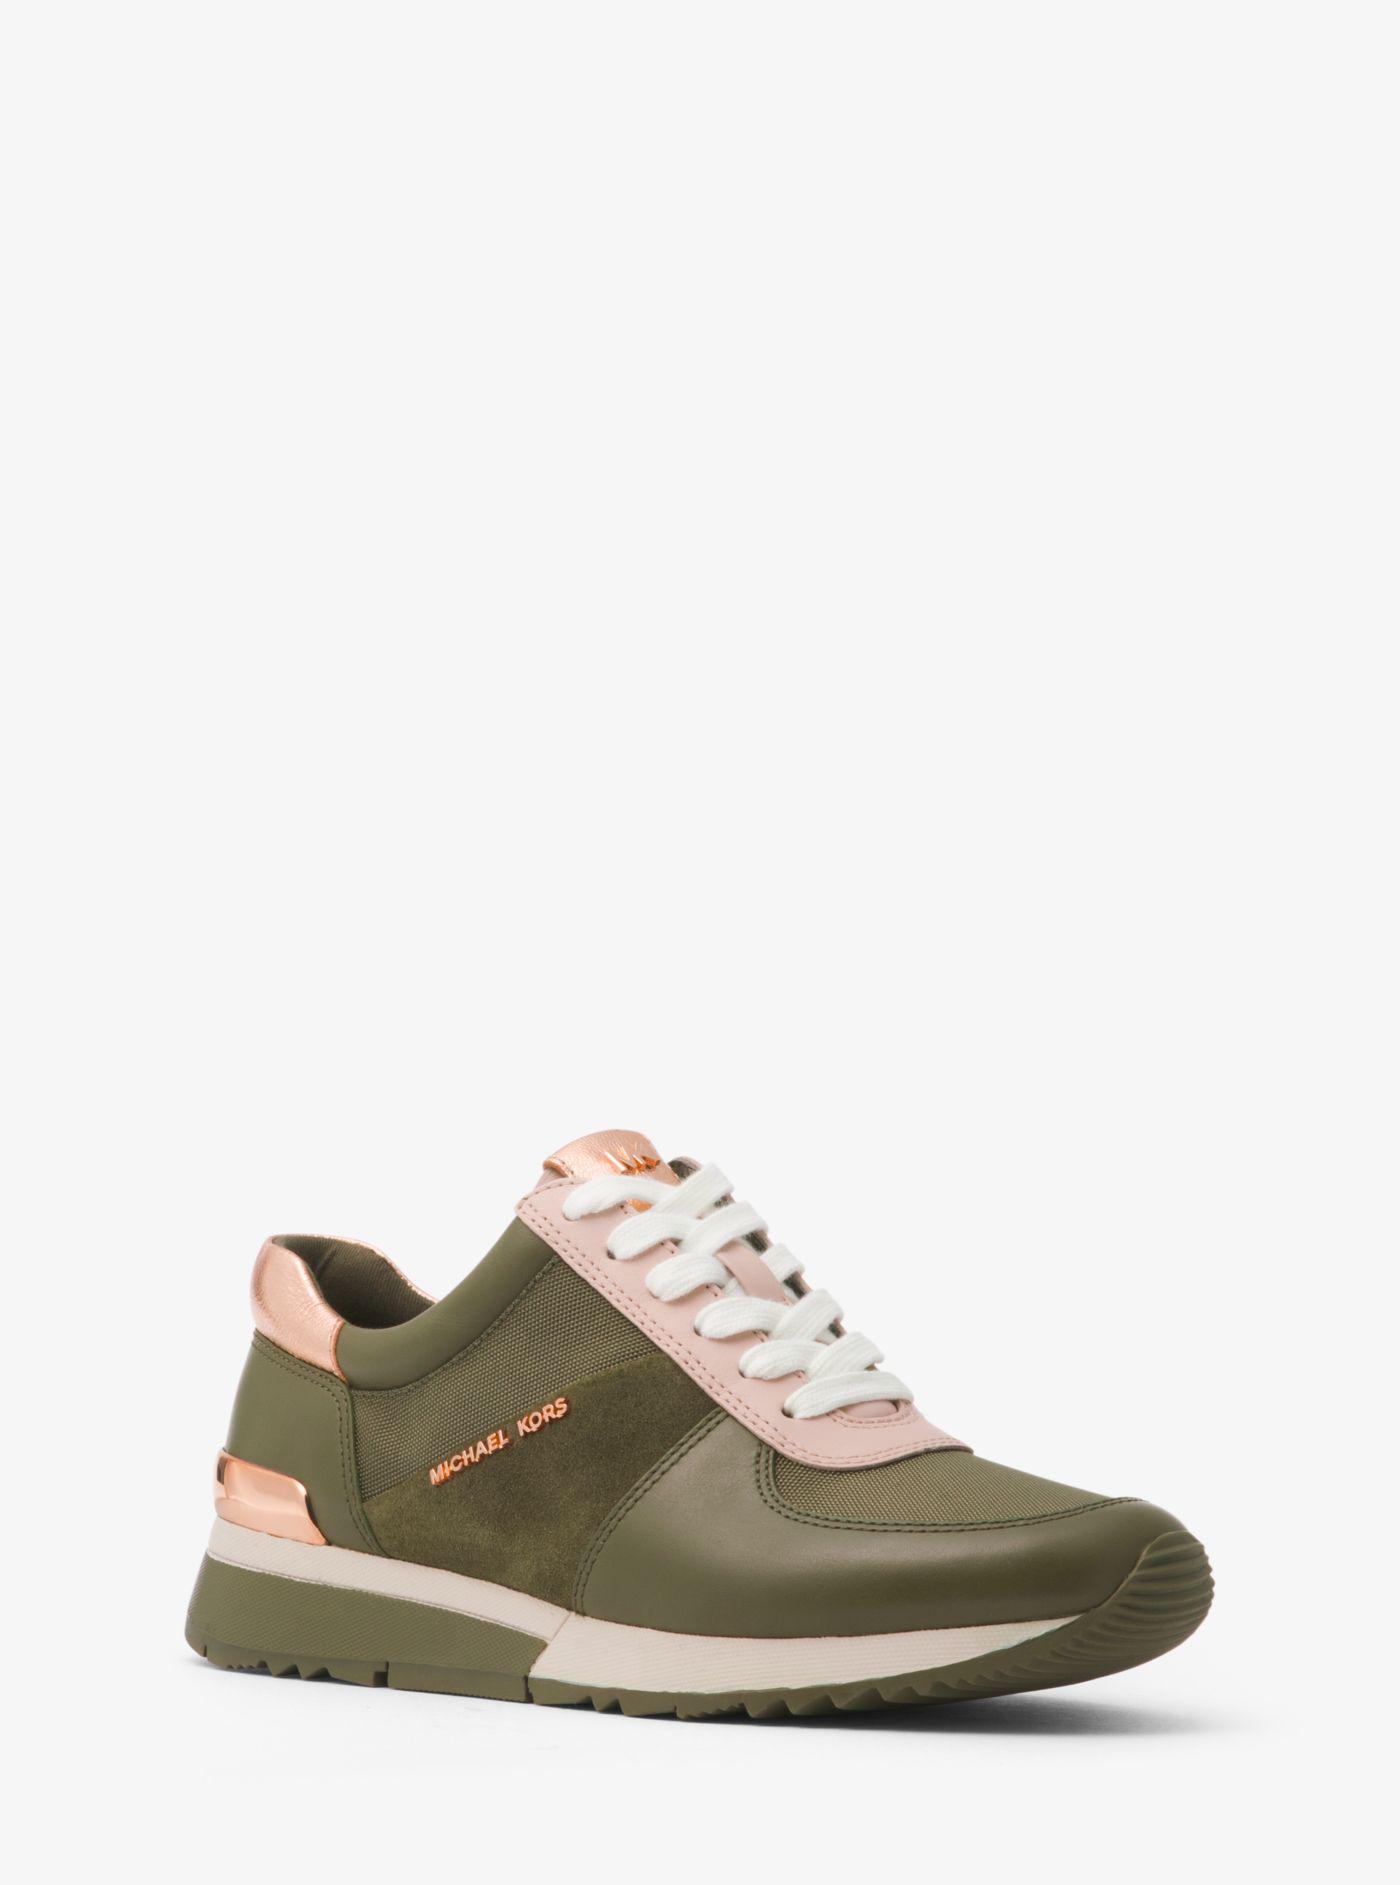 Kors Allie And Canvas Sneaker in Green | Lyst